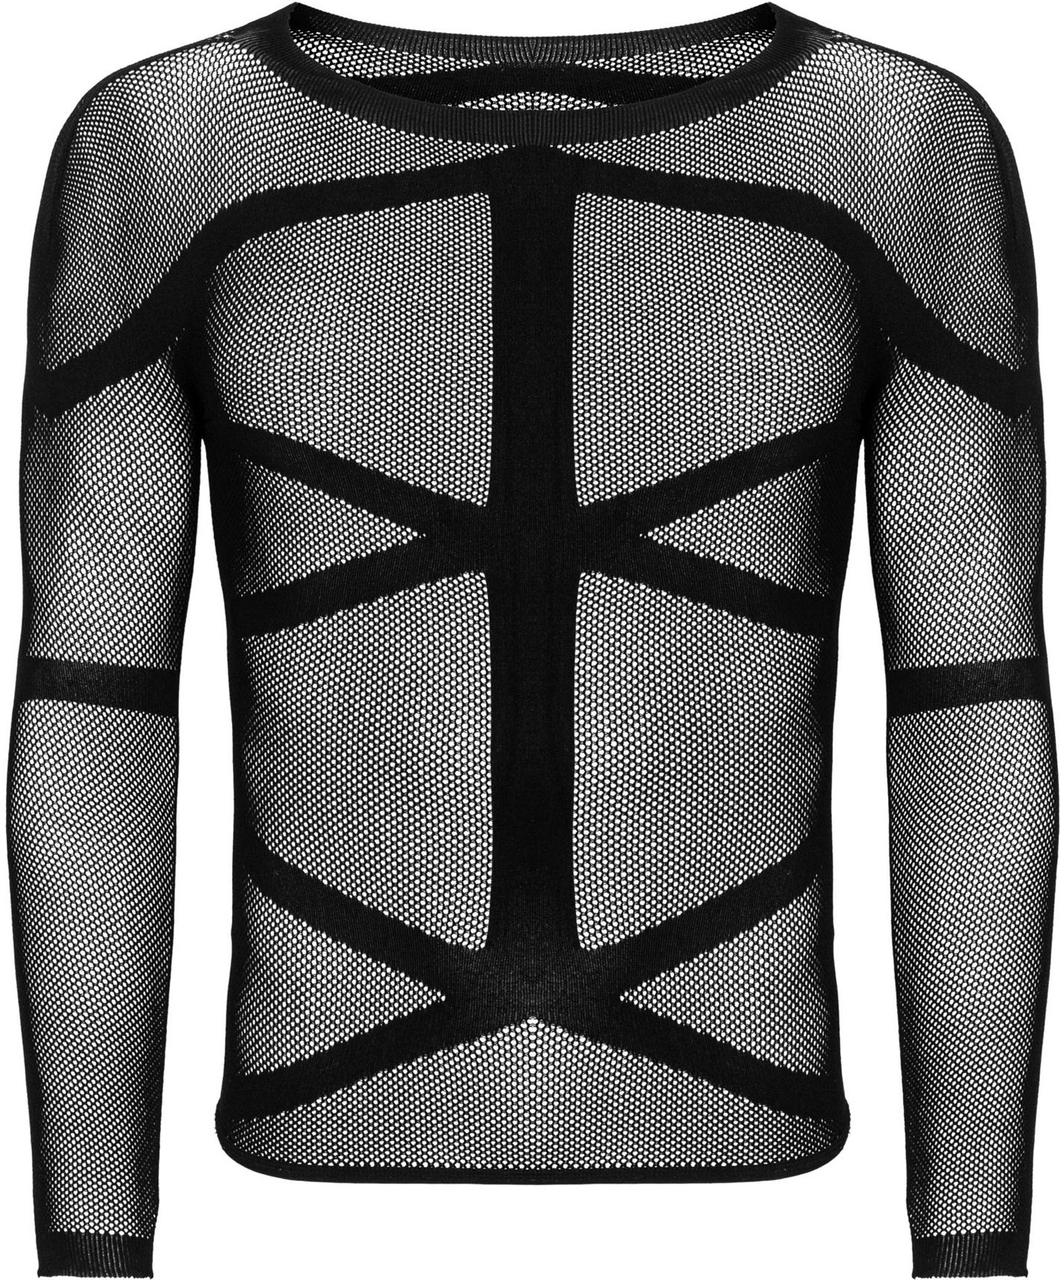 Obsessive black net tight shirt with sleeves